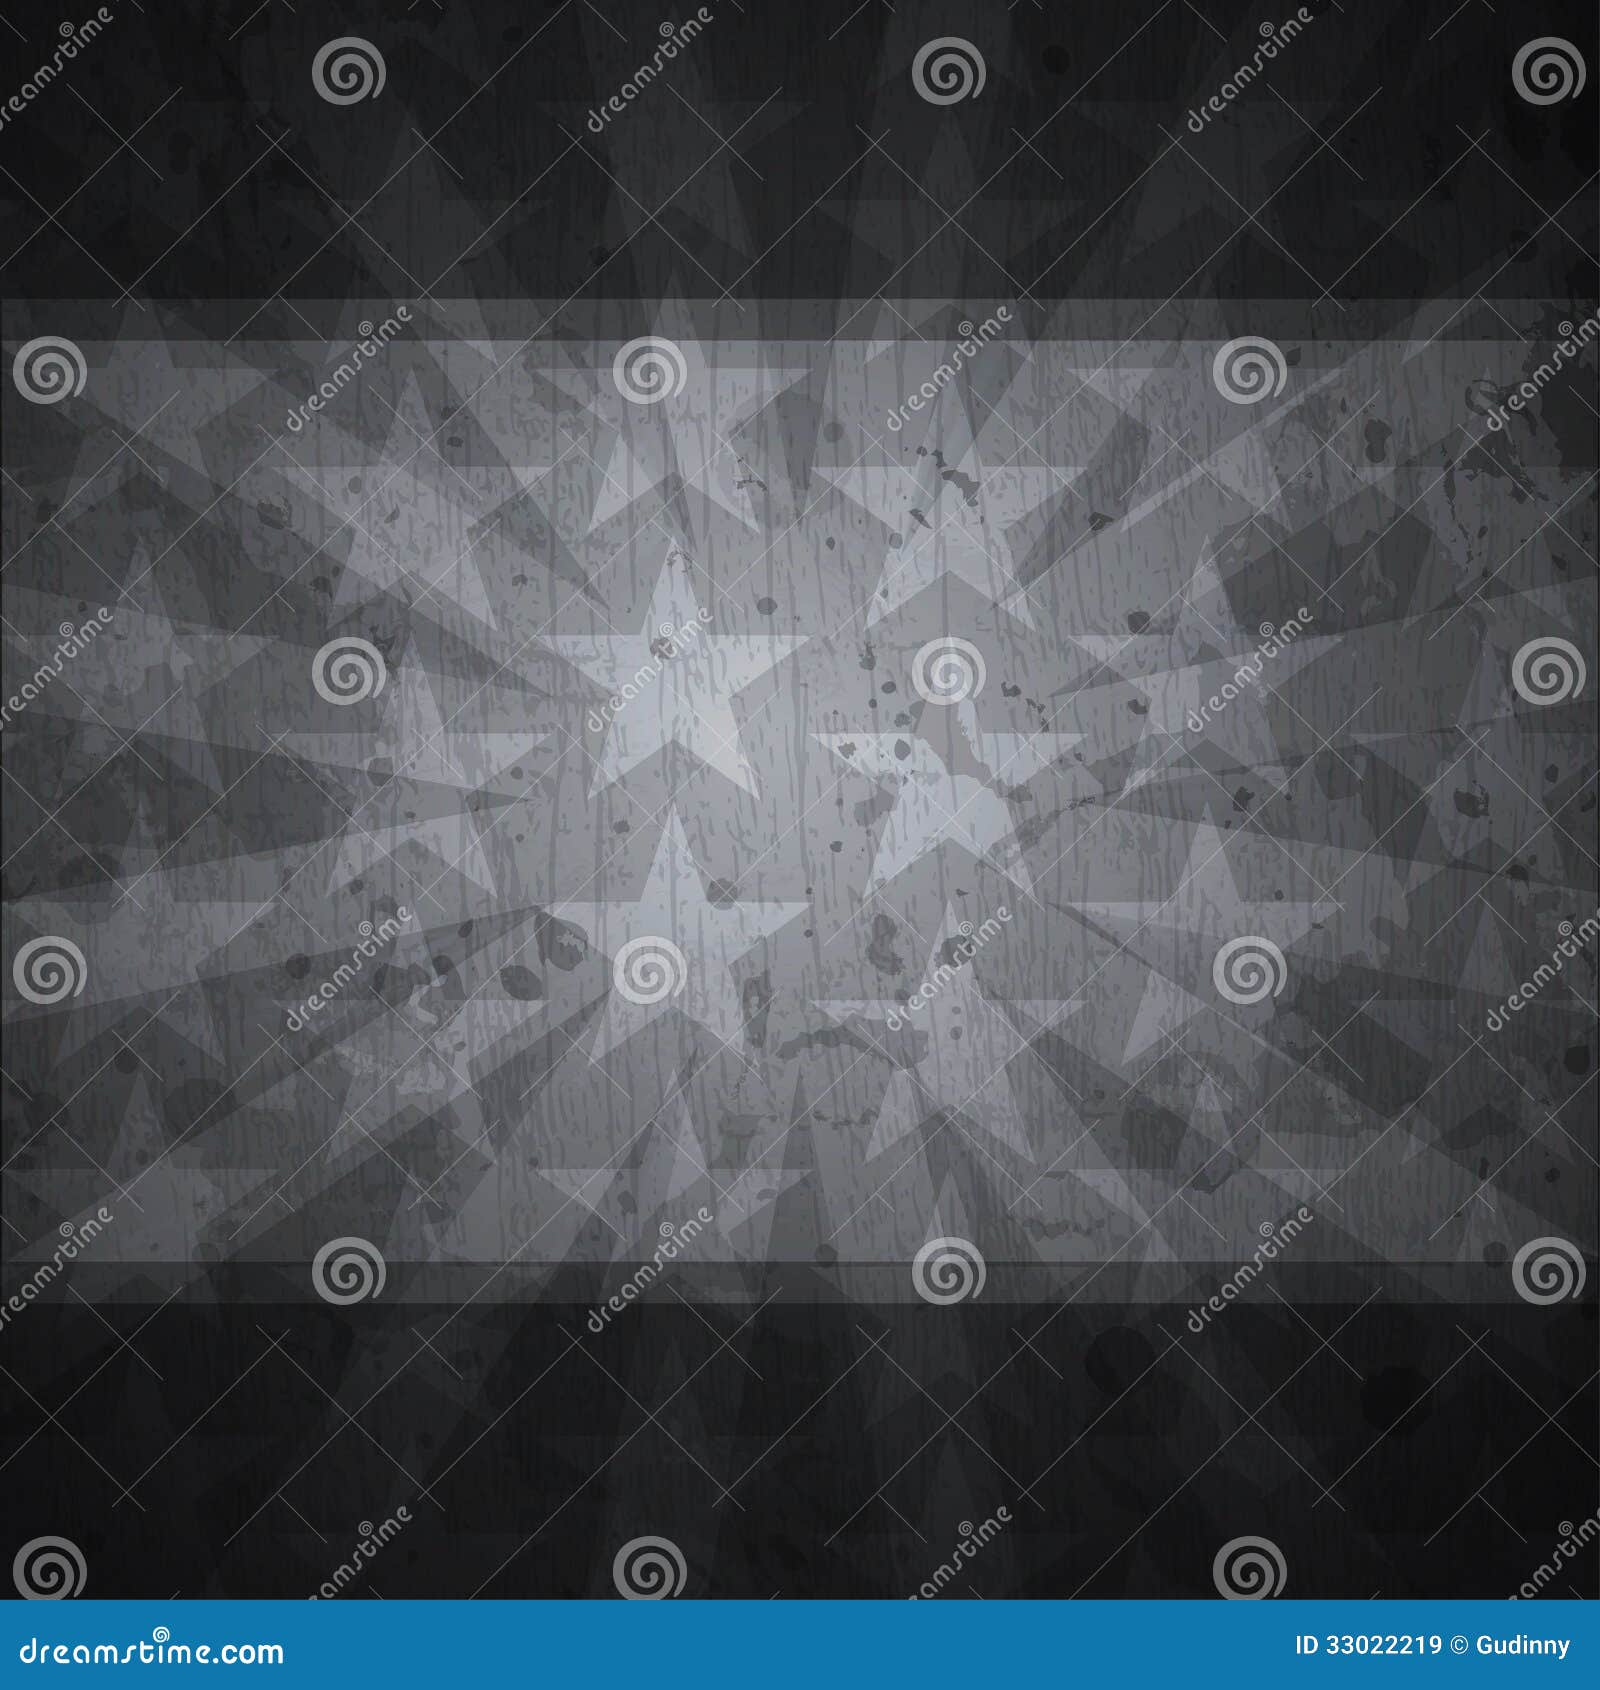 Retro Stars Black Background With Grunge Effect Stock Vector